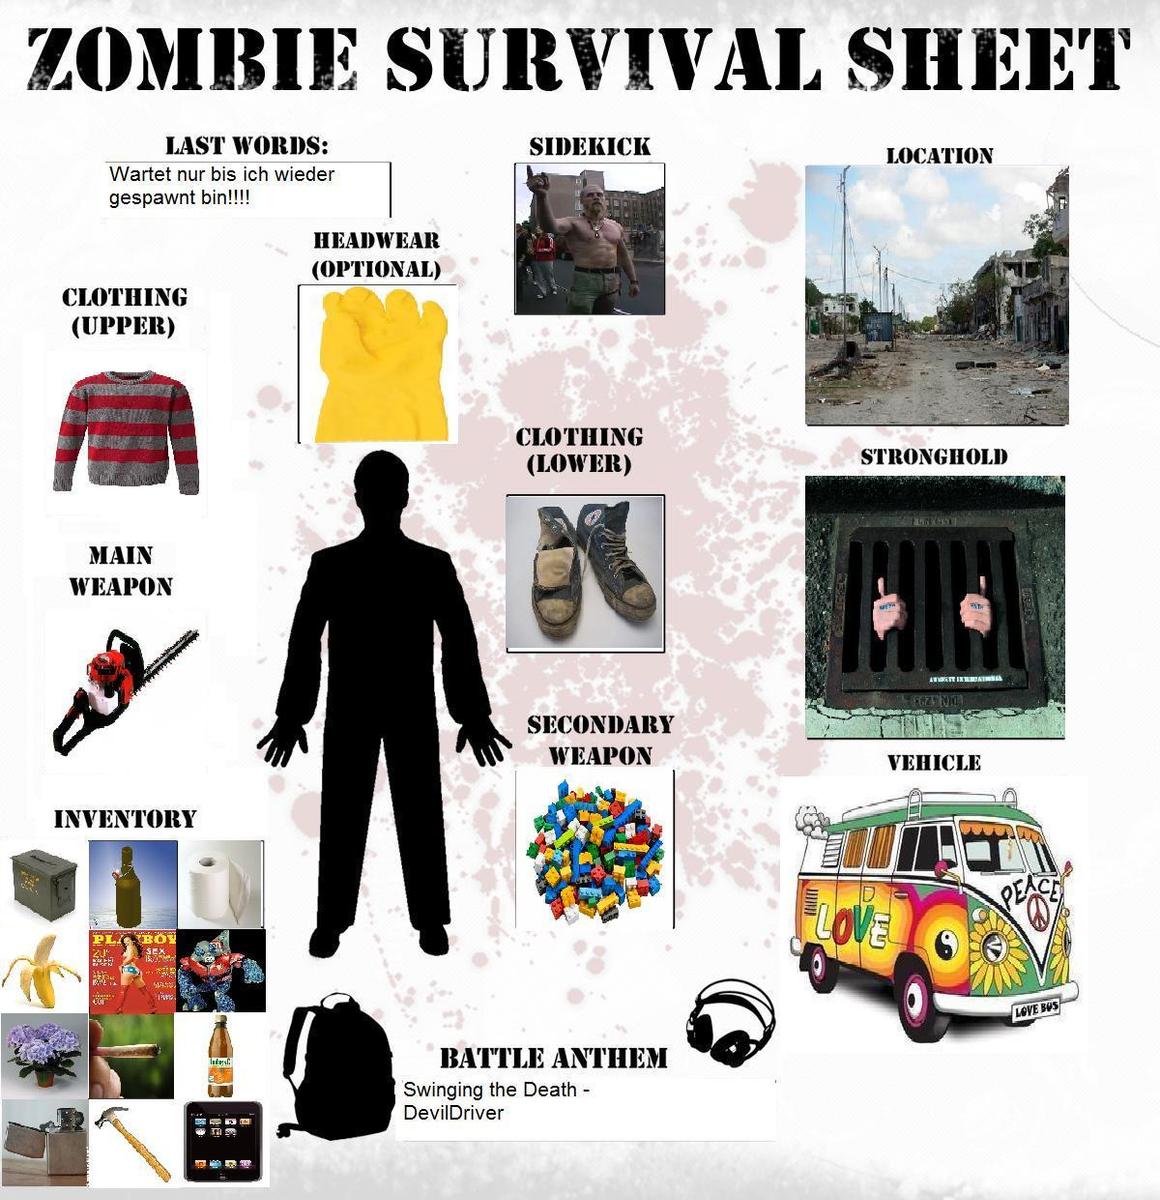 /dateien/uh61294,1268924387,uh612941268911386Zombie Survival Sheet Template by MrAlf